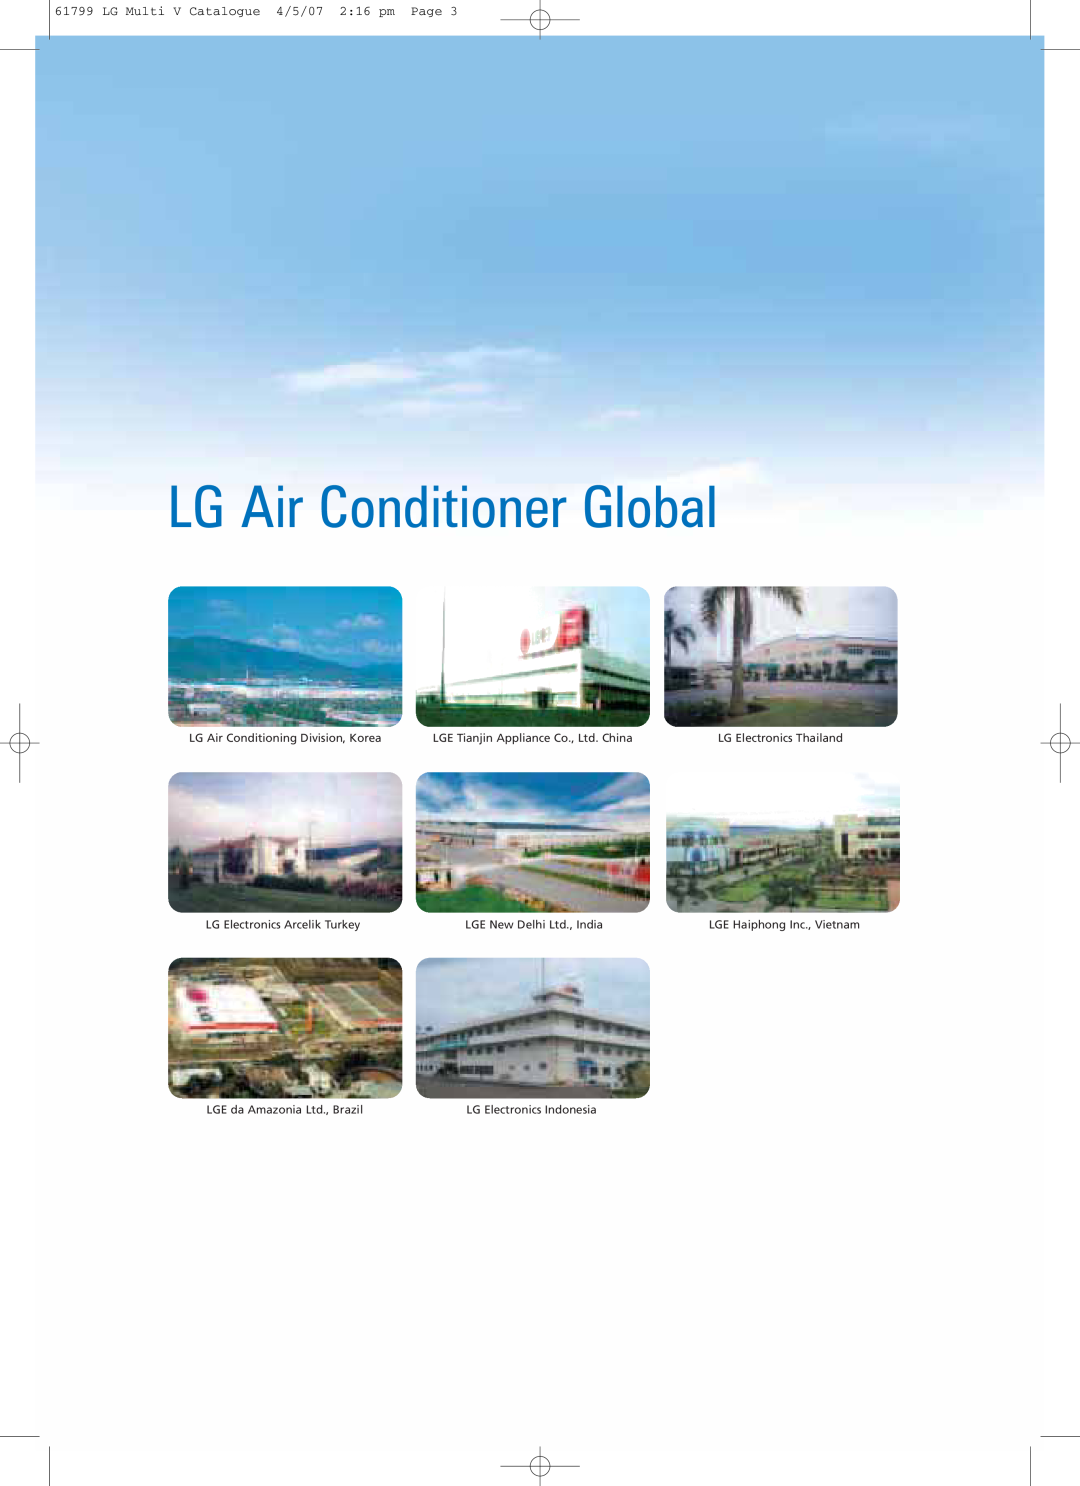 LG Electronics PRHR040 manual LG Air Conditioner Global, LG Multi V Catalogue 4/5/07 216 pm Page 